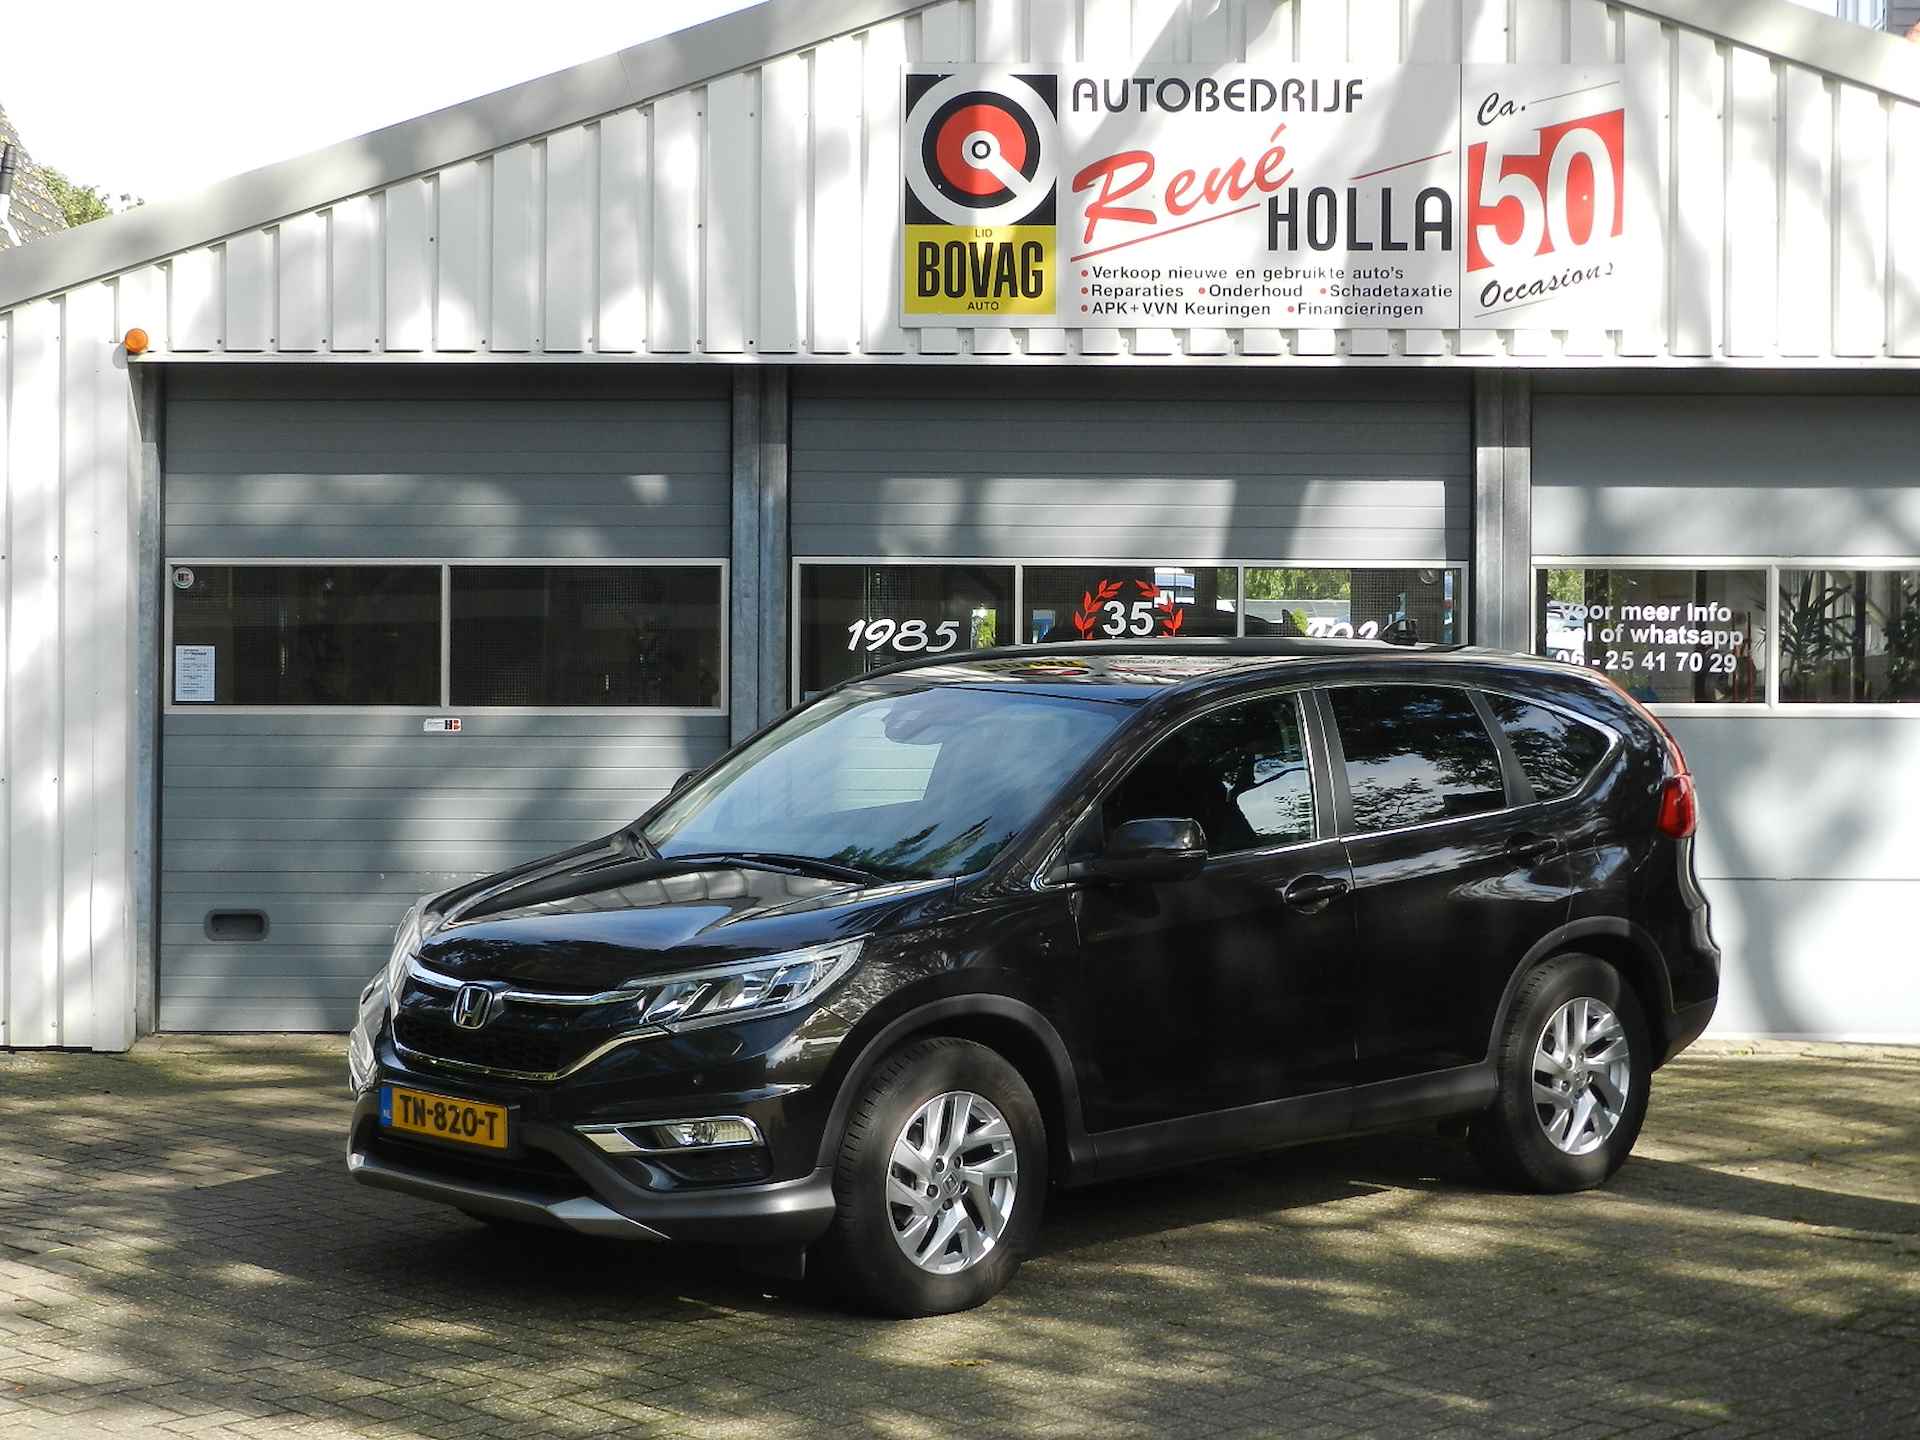 Honda CR-V 2.0 4WD Lifestyle Automaat Climate en Cruise contr PDC Camera - 4/50